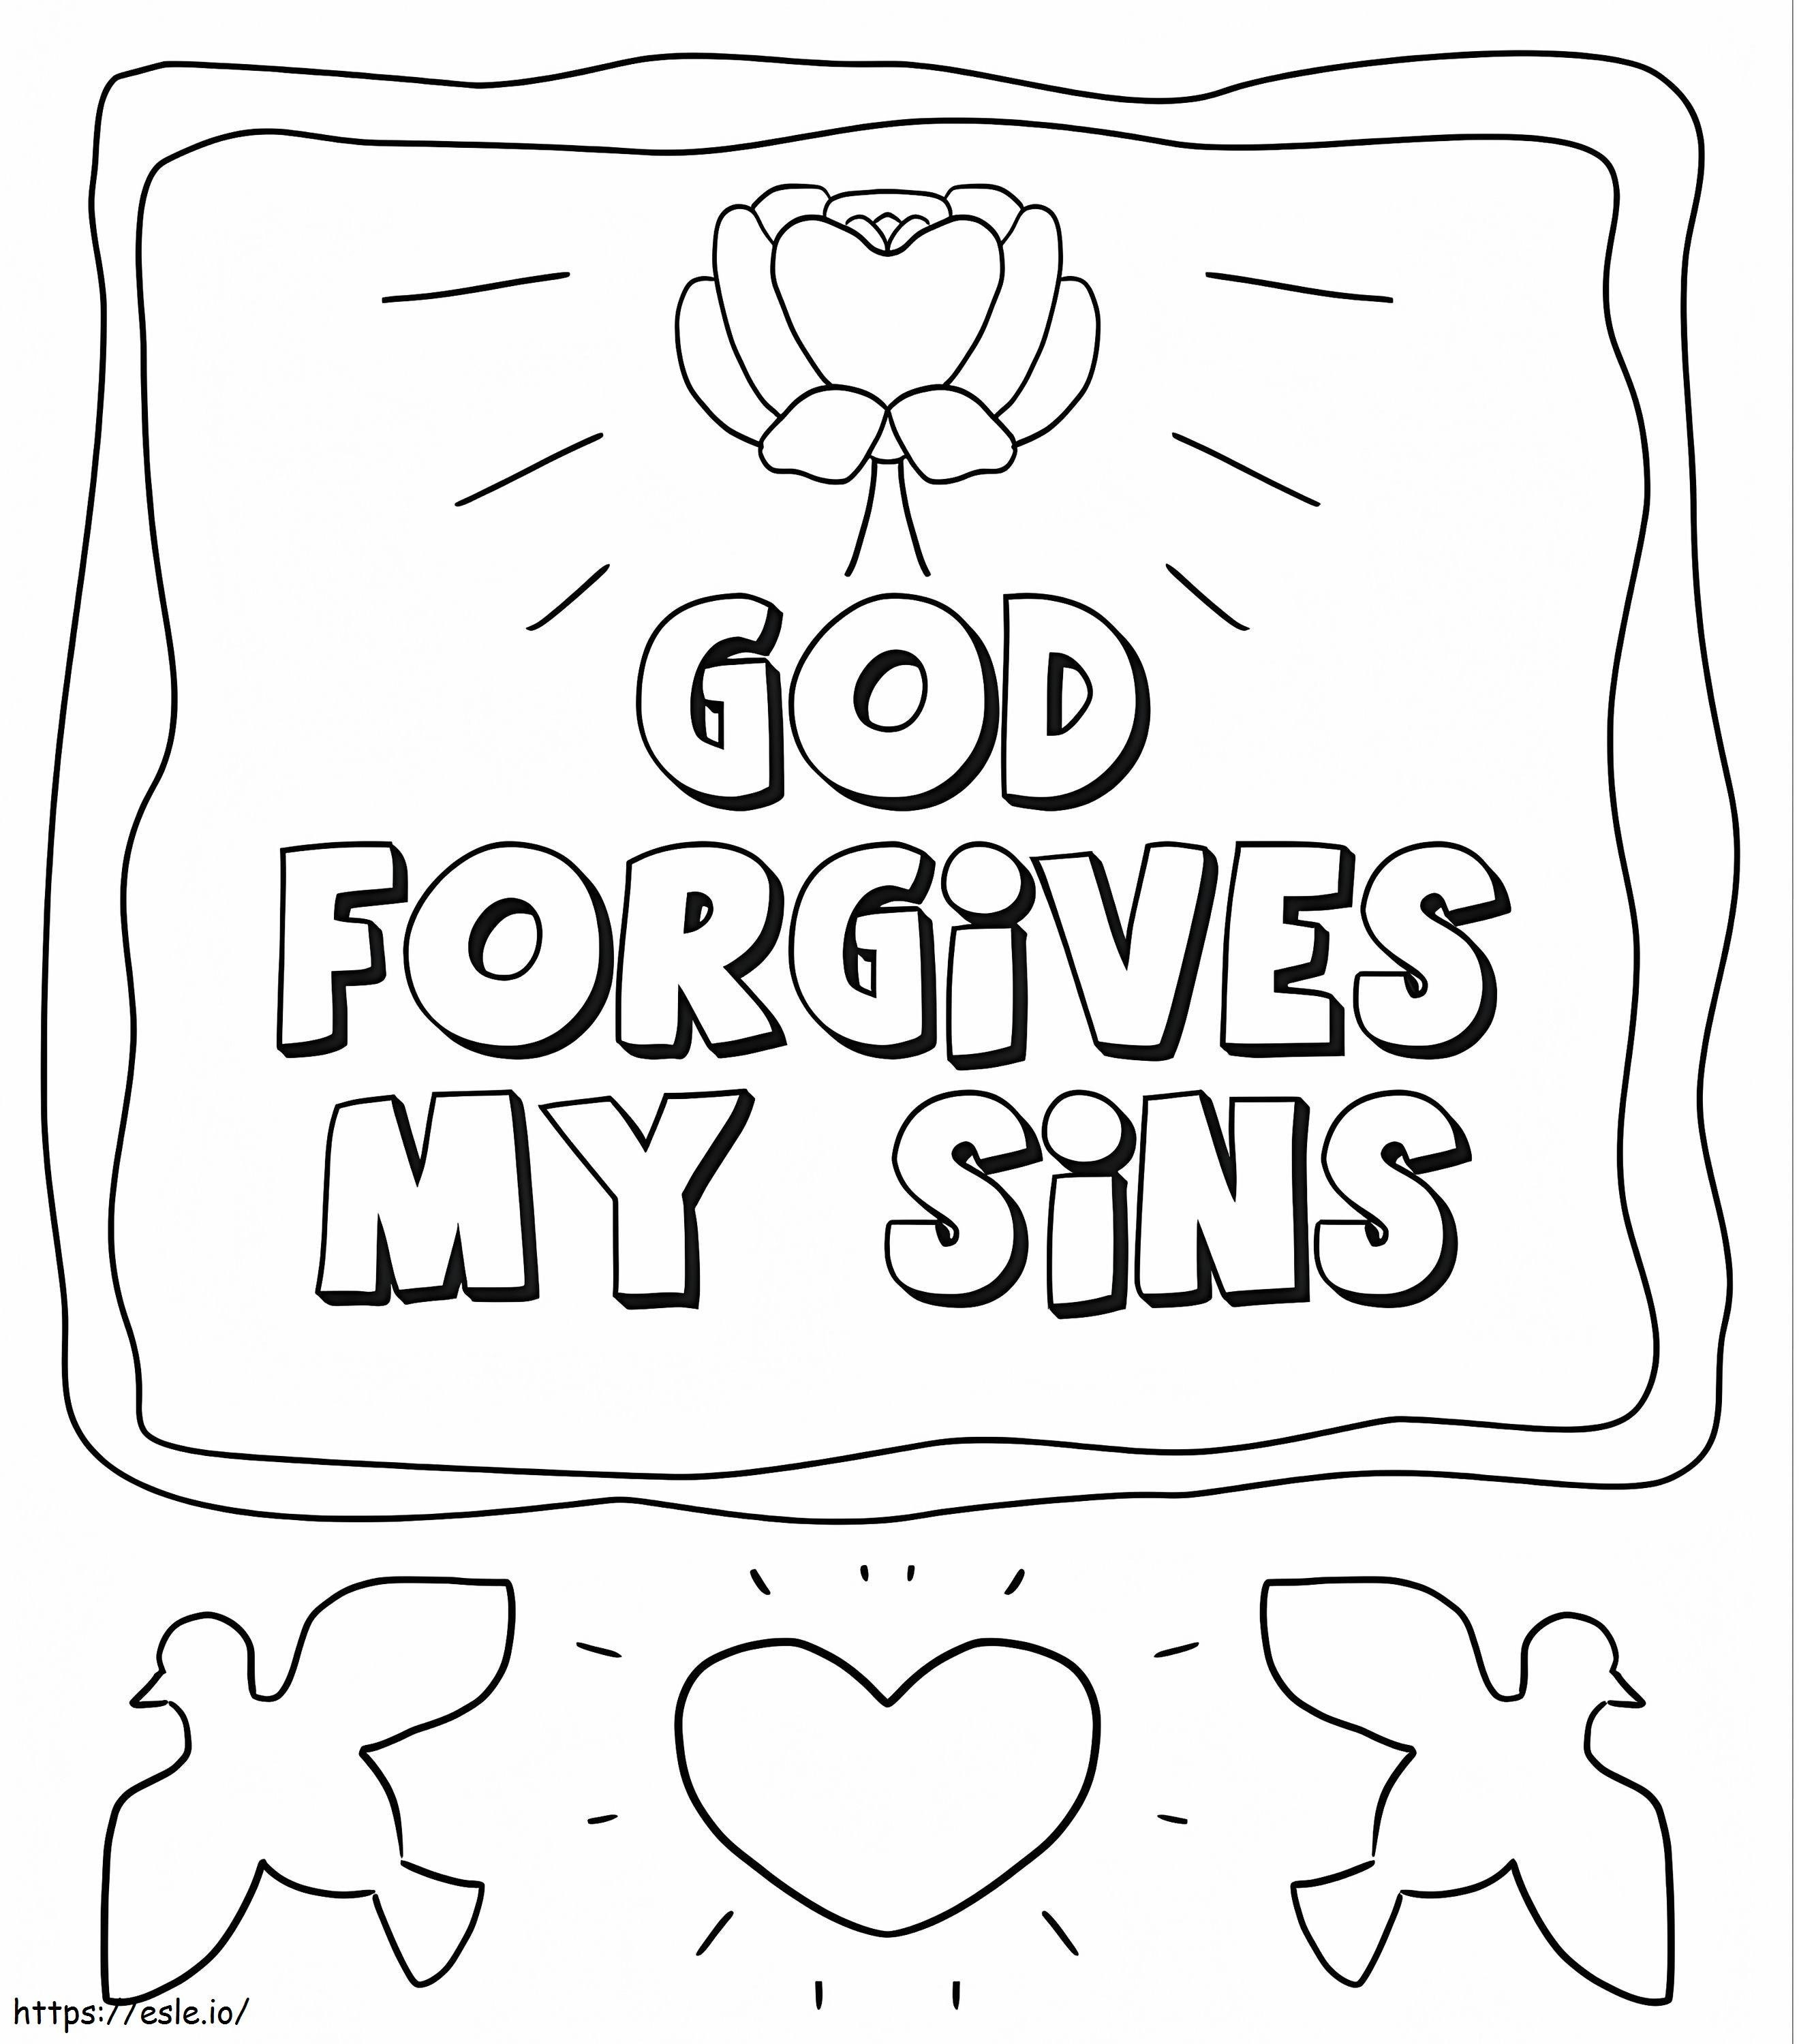 God Forgives My Sins coloring page